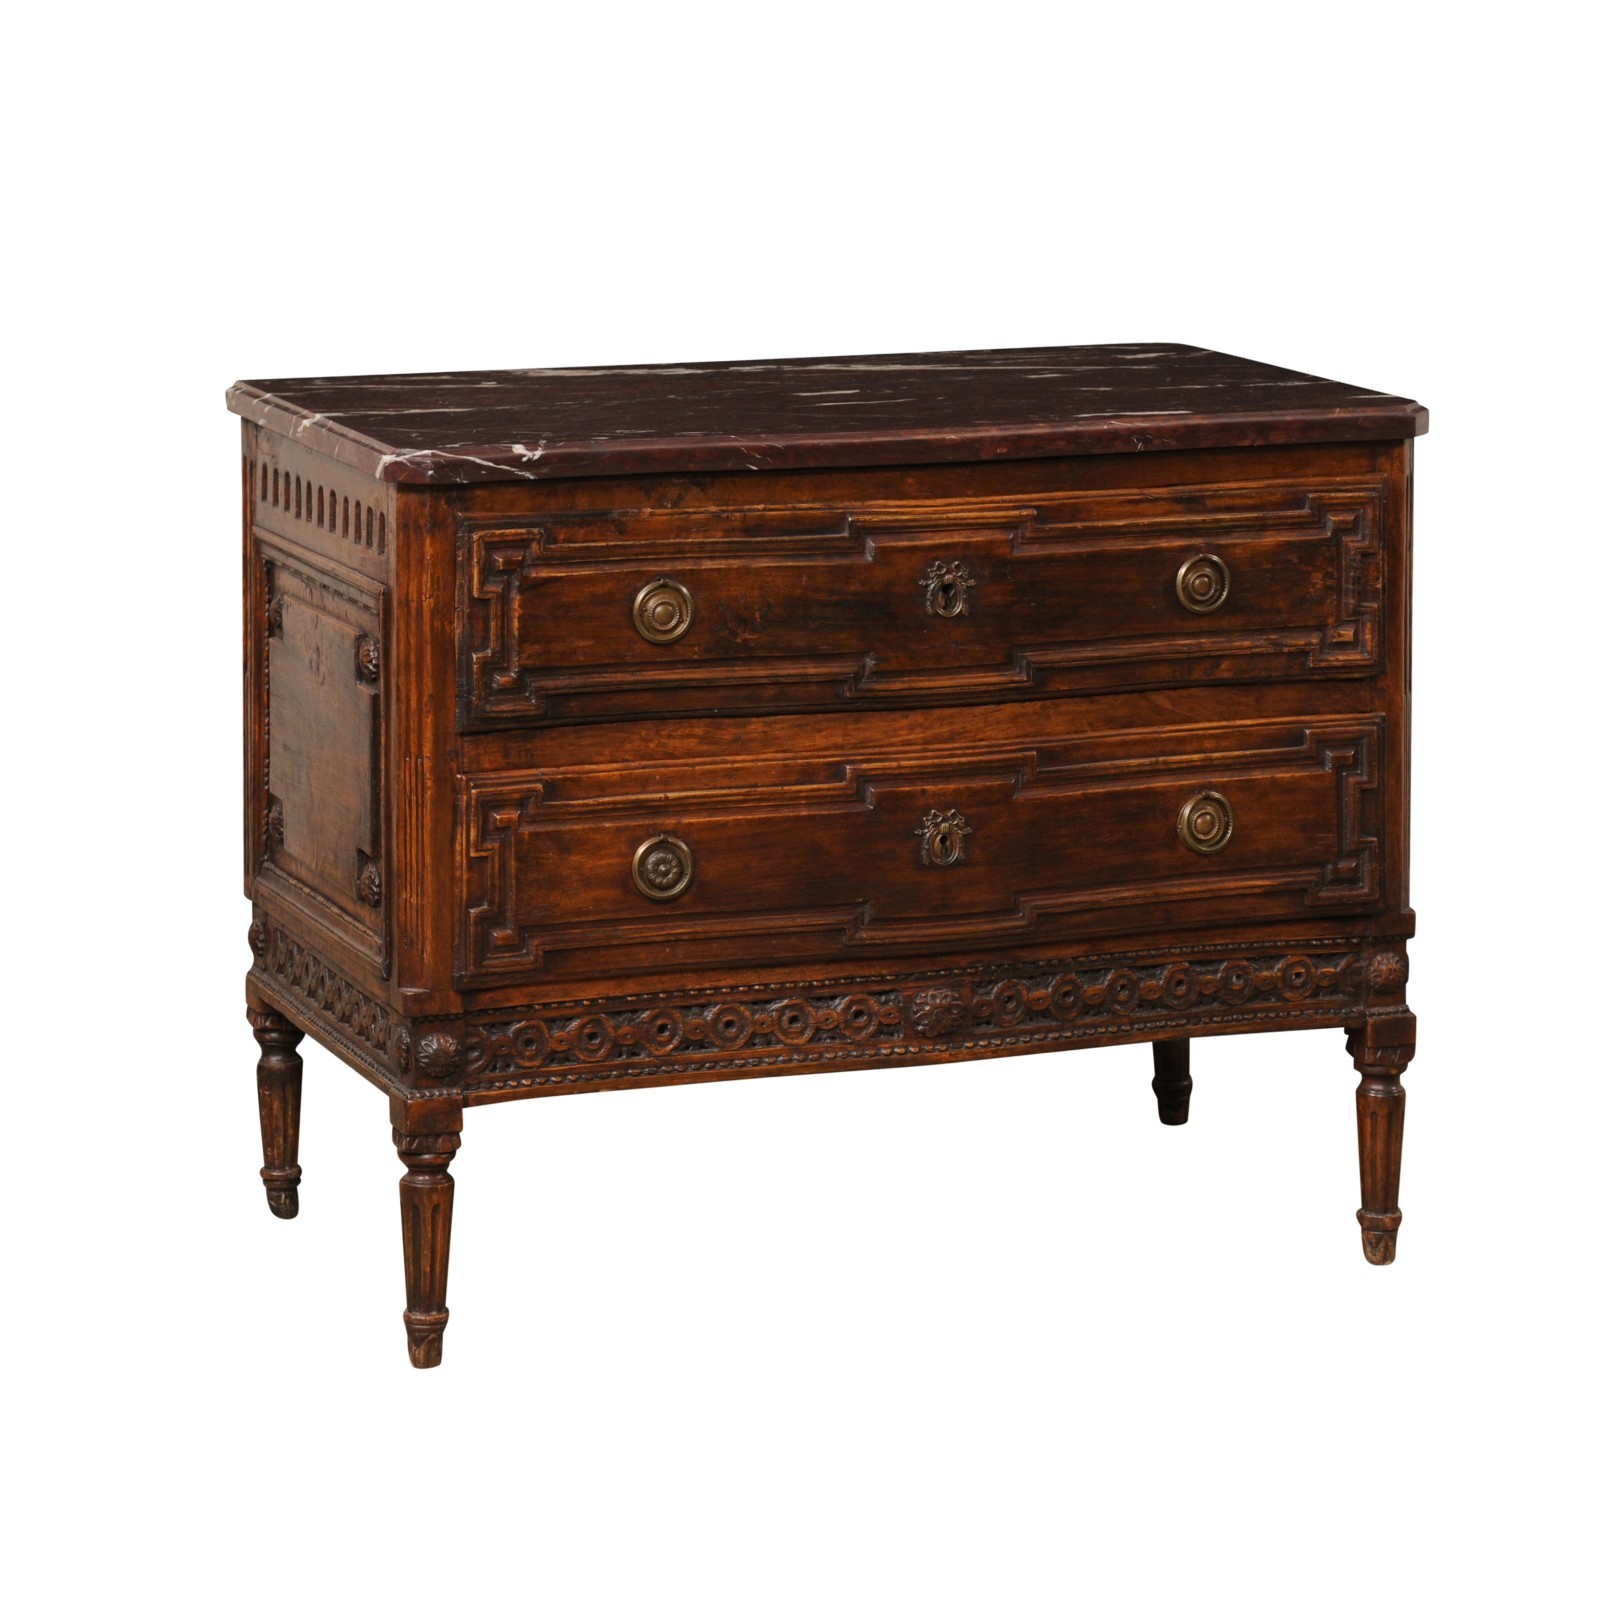 French Period Neoclassical Marble Top Chest